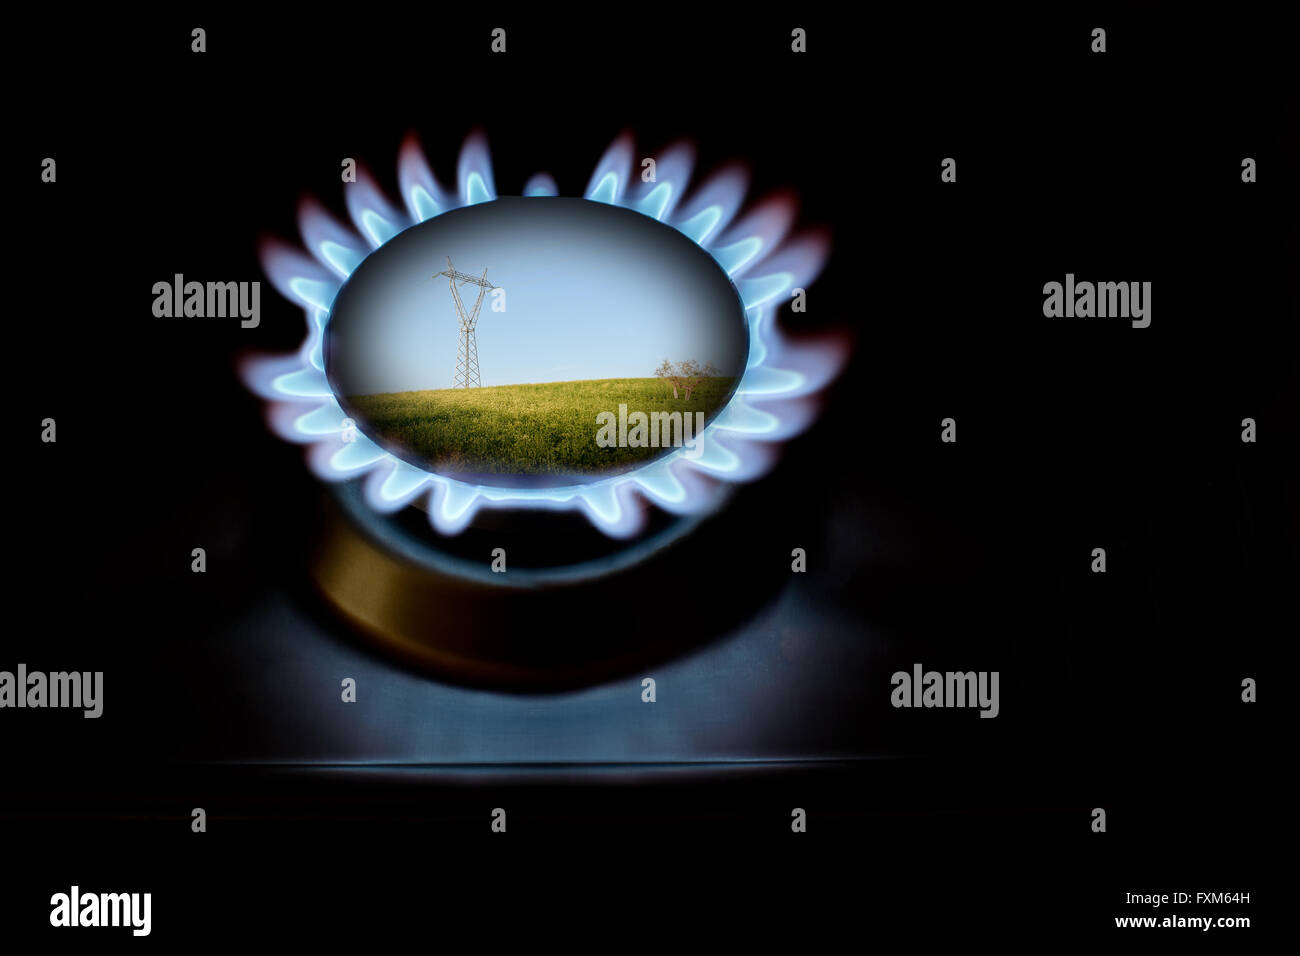 Gas and electricity for protection of enviroment Stock Photo